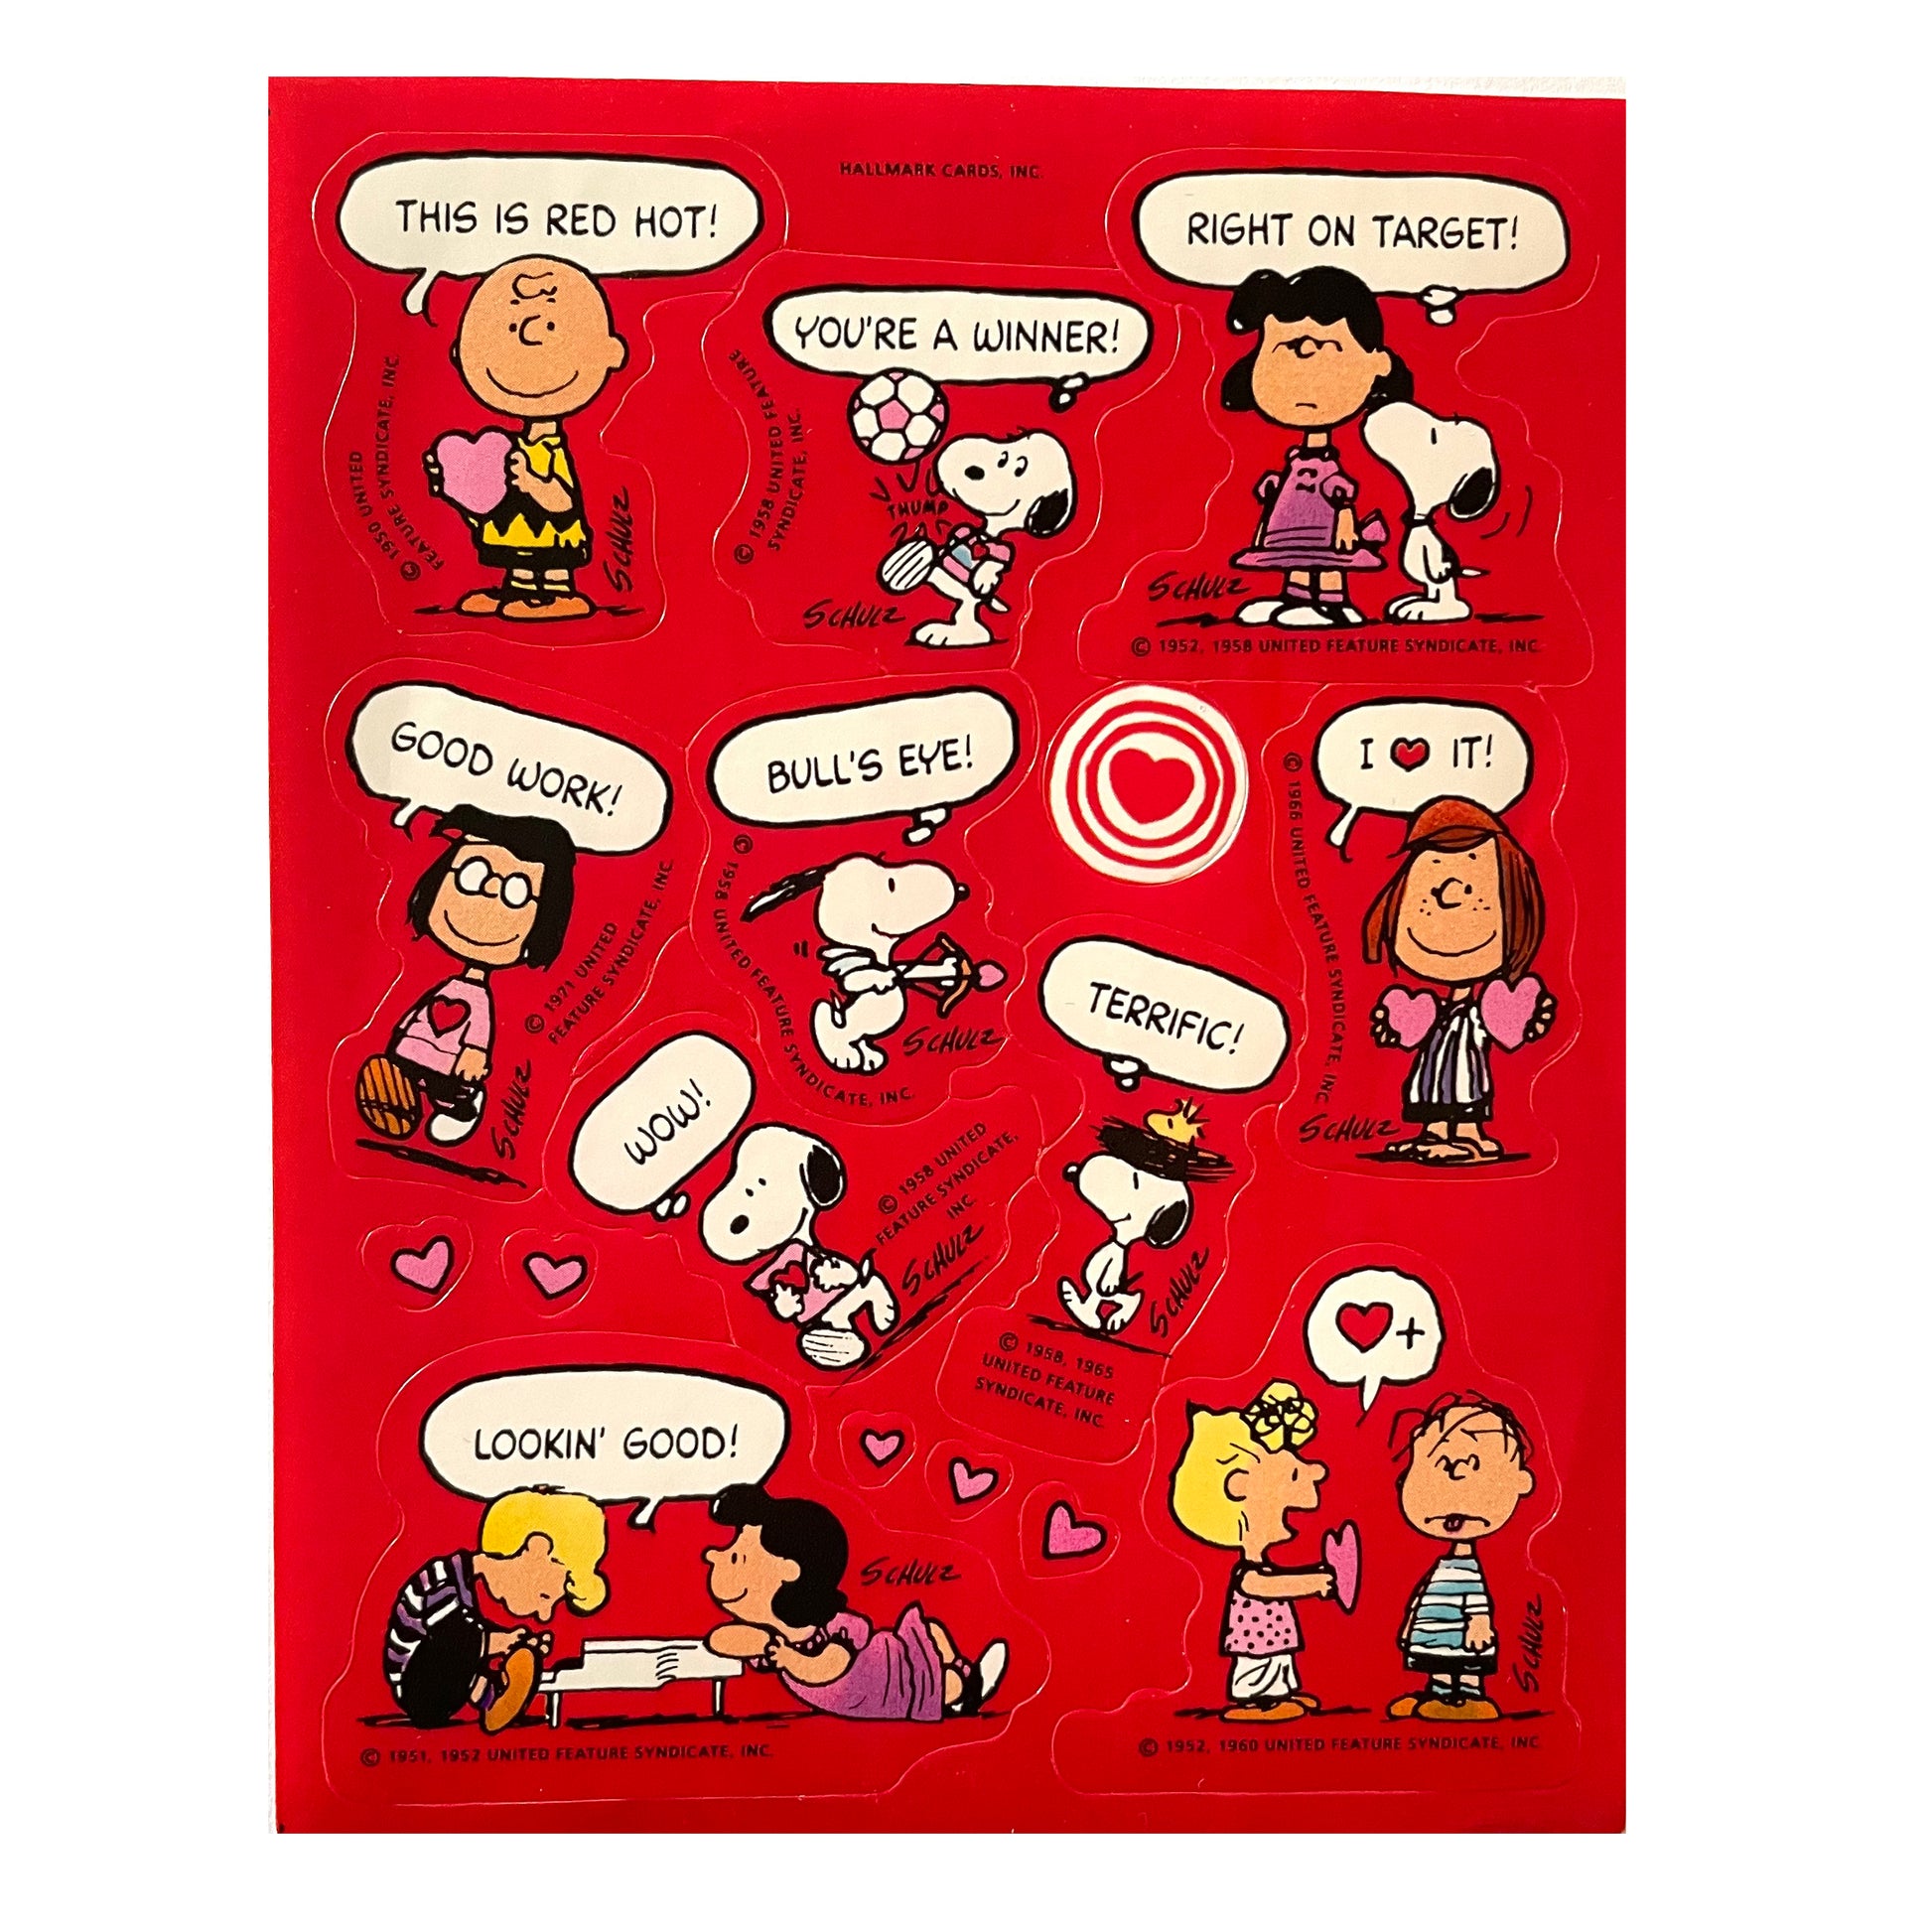 GIFTED LINE: Vintage Valentine's Stickers